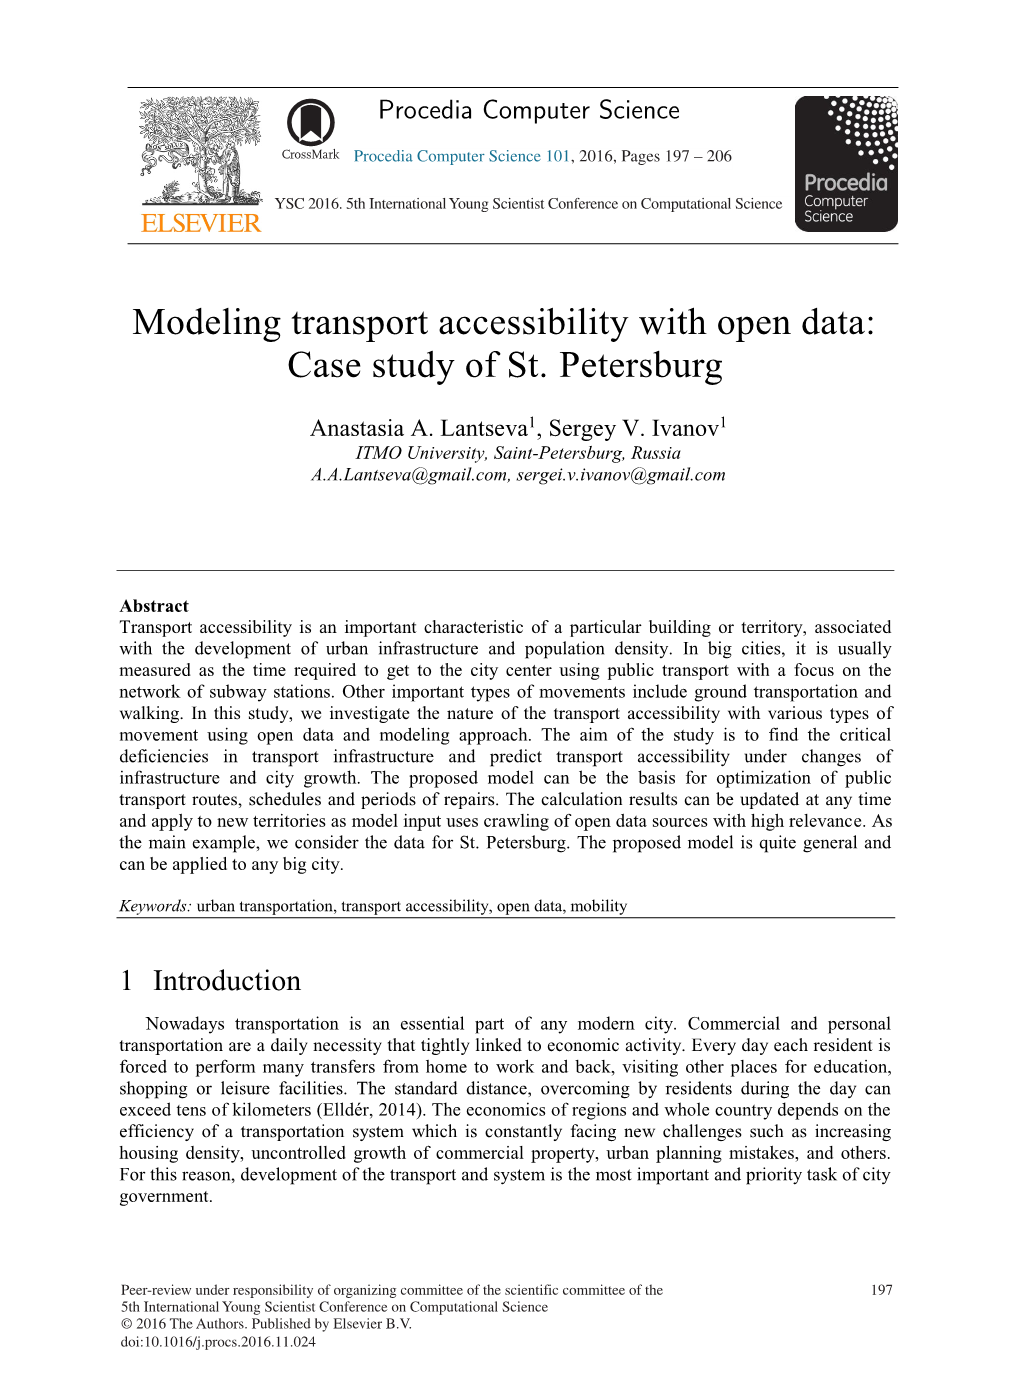 Modeling Transport Accessibility with Open Data: Case Study of St